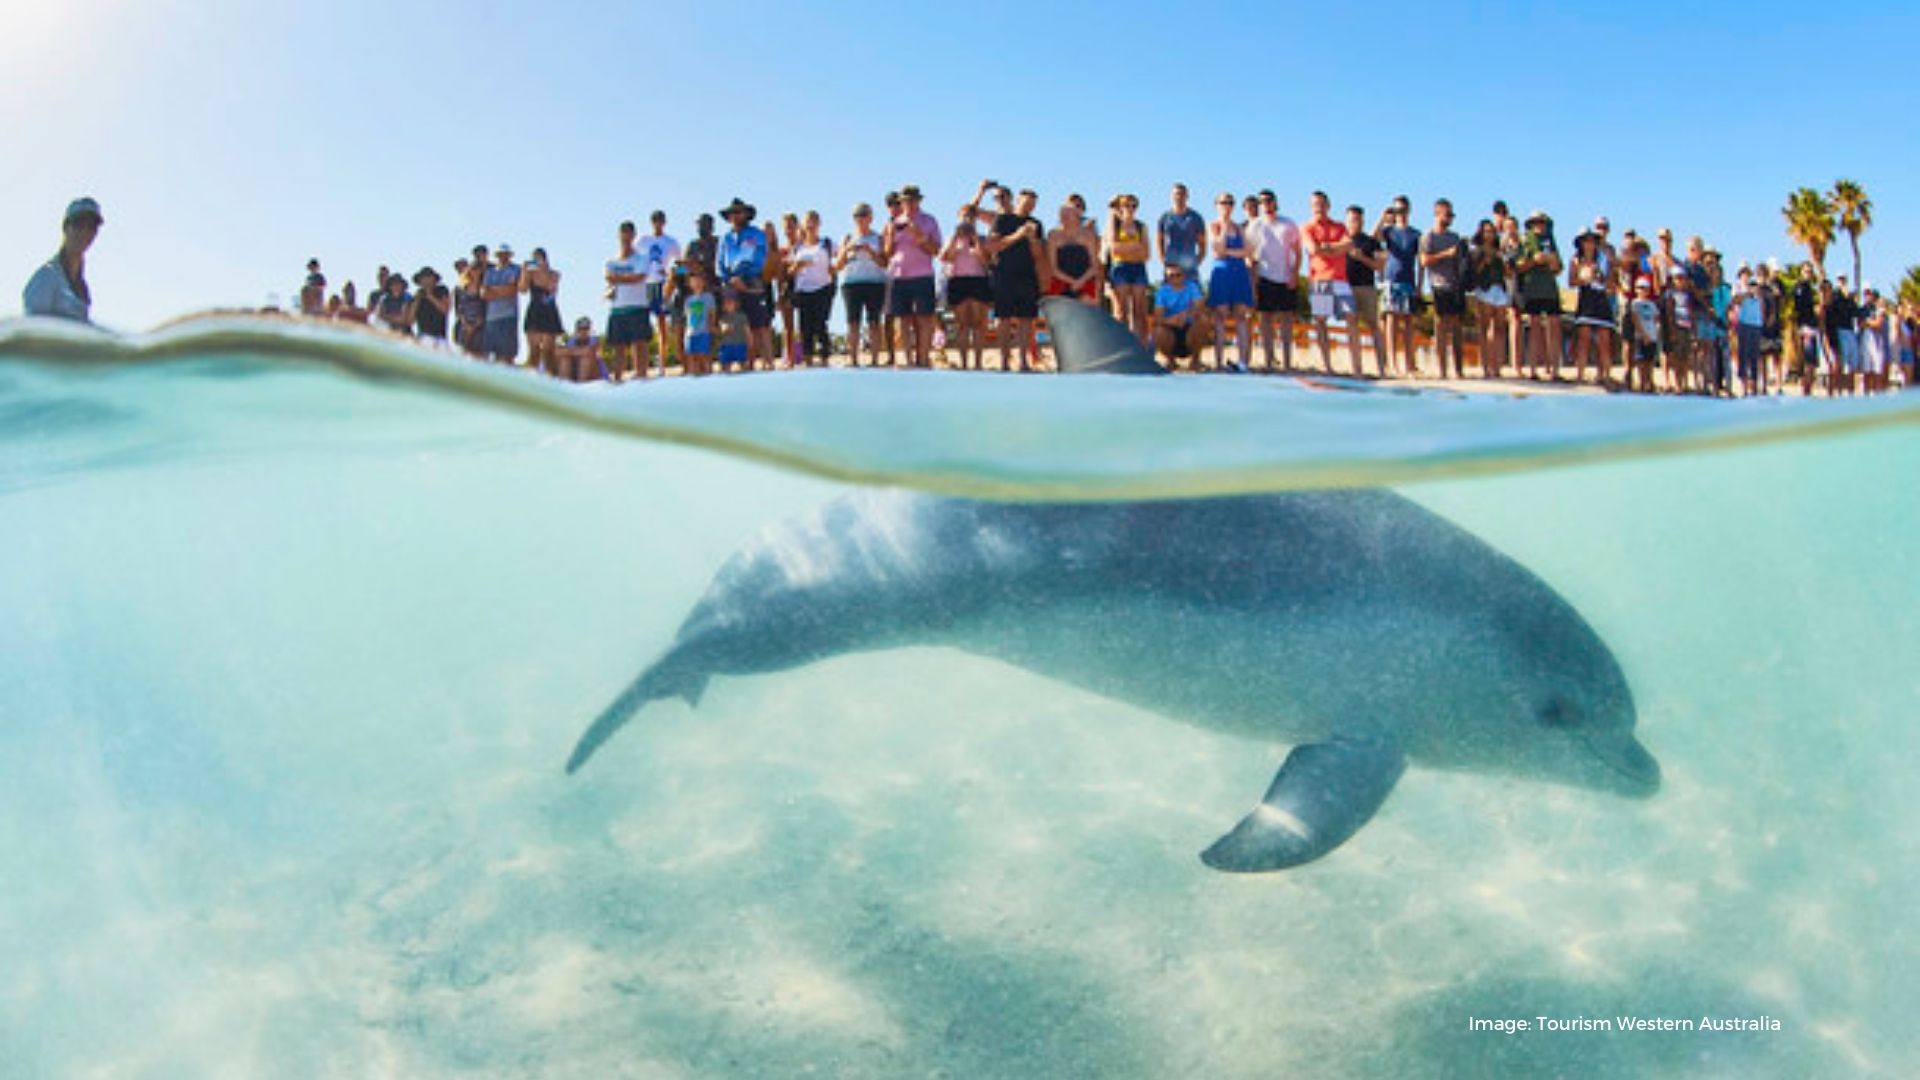 Dolphin swimming in clear blue water with crowd on beach watching | Tourism Western Australia